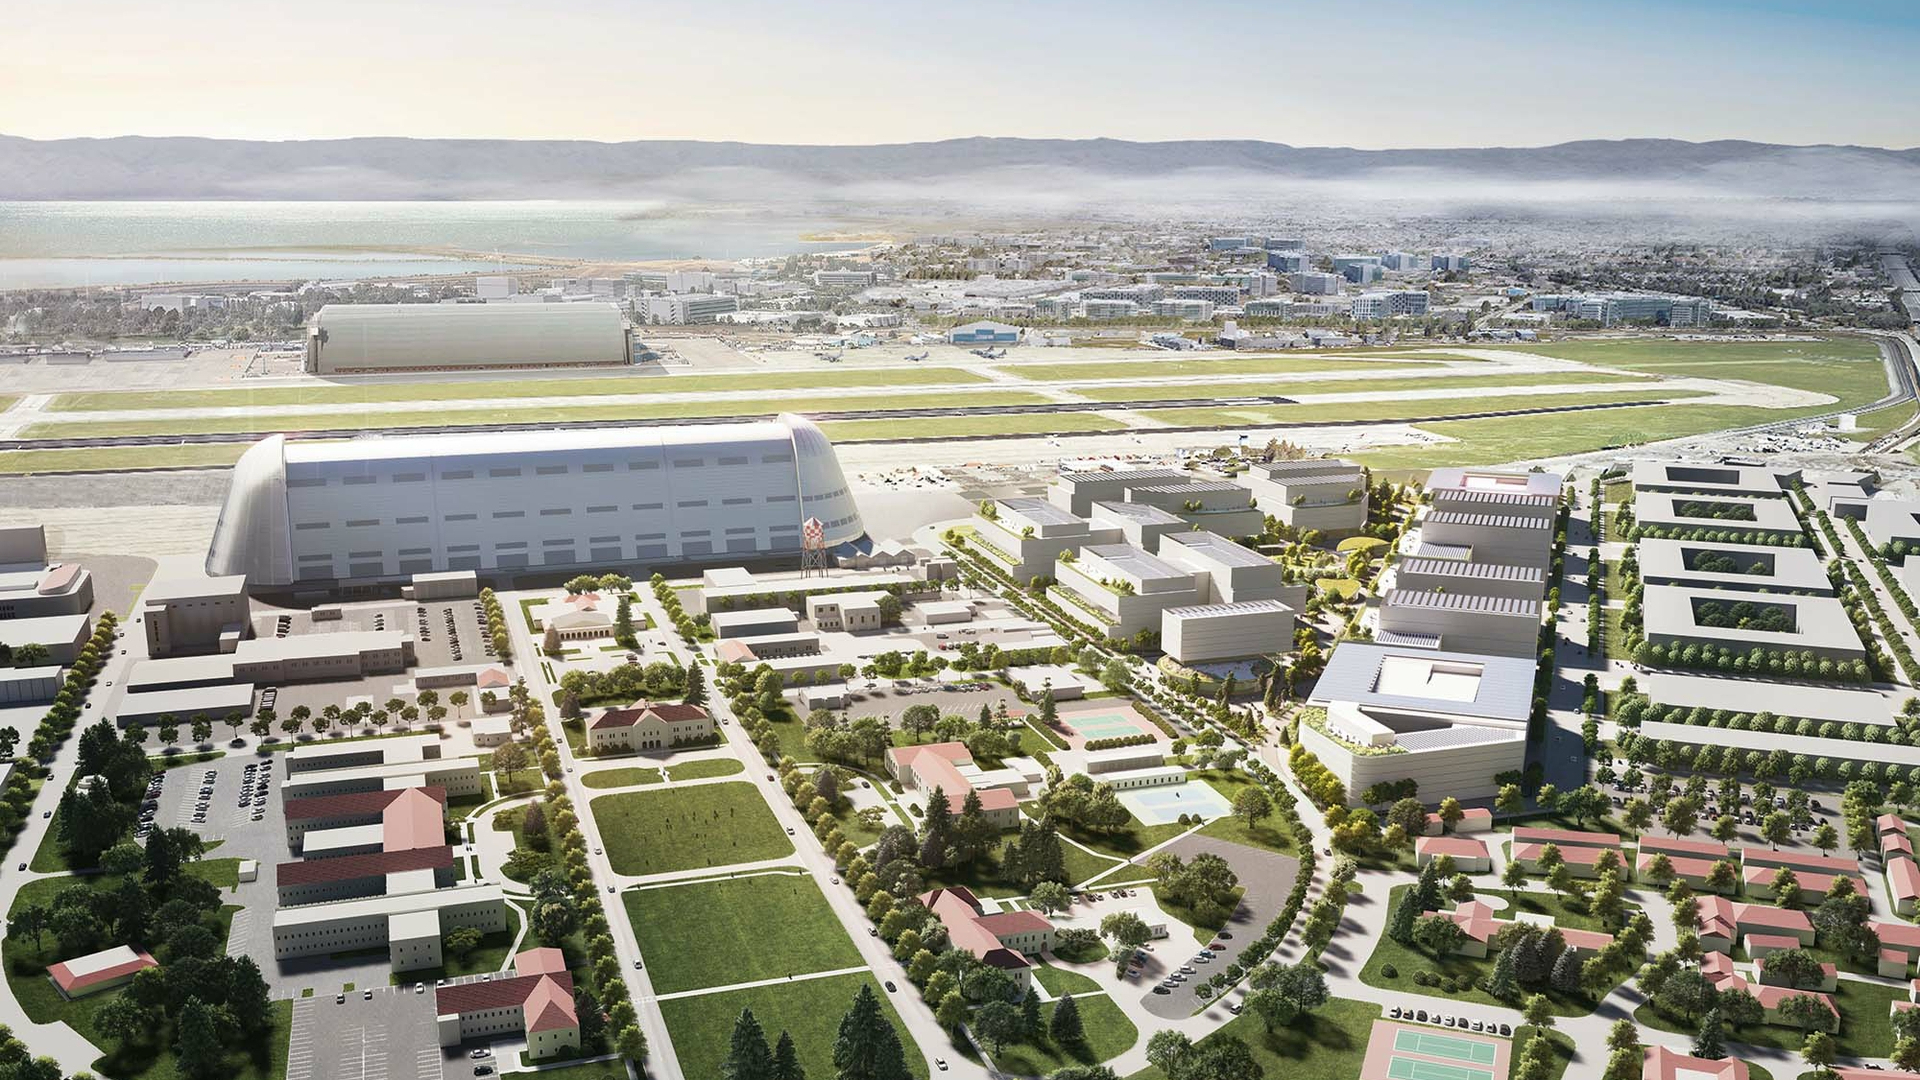 NASA Ames, UC Berkeley to build $2 billion space center in Silicon Valley Space